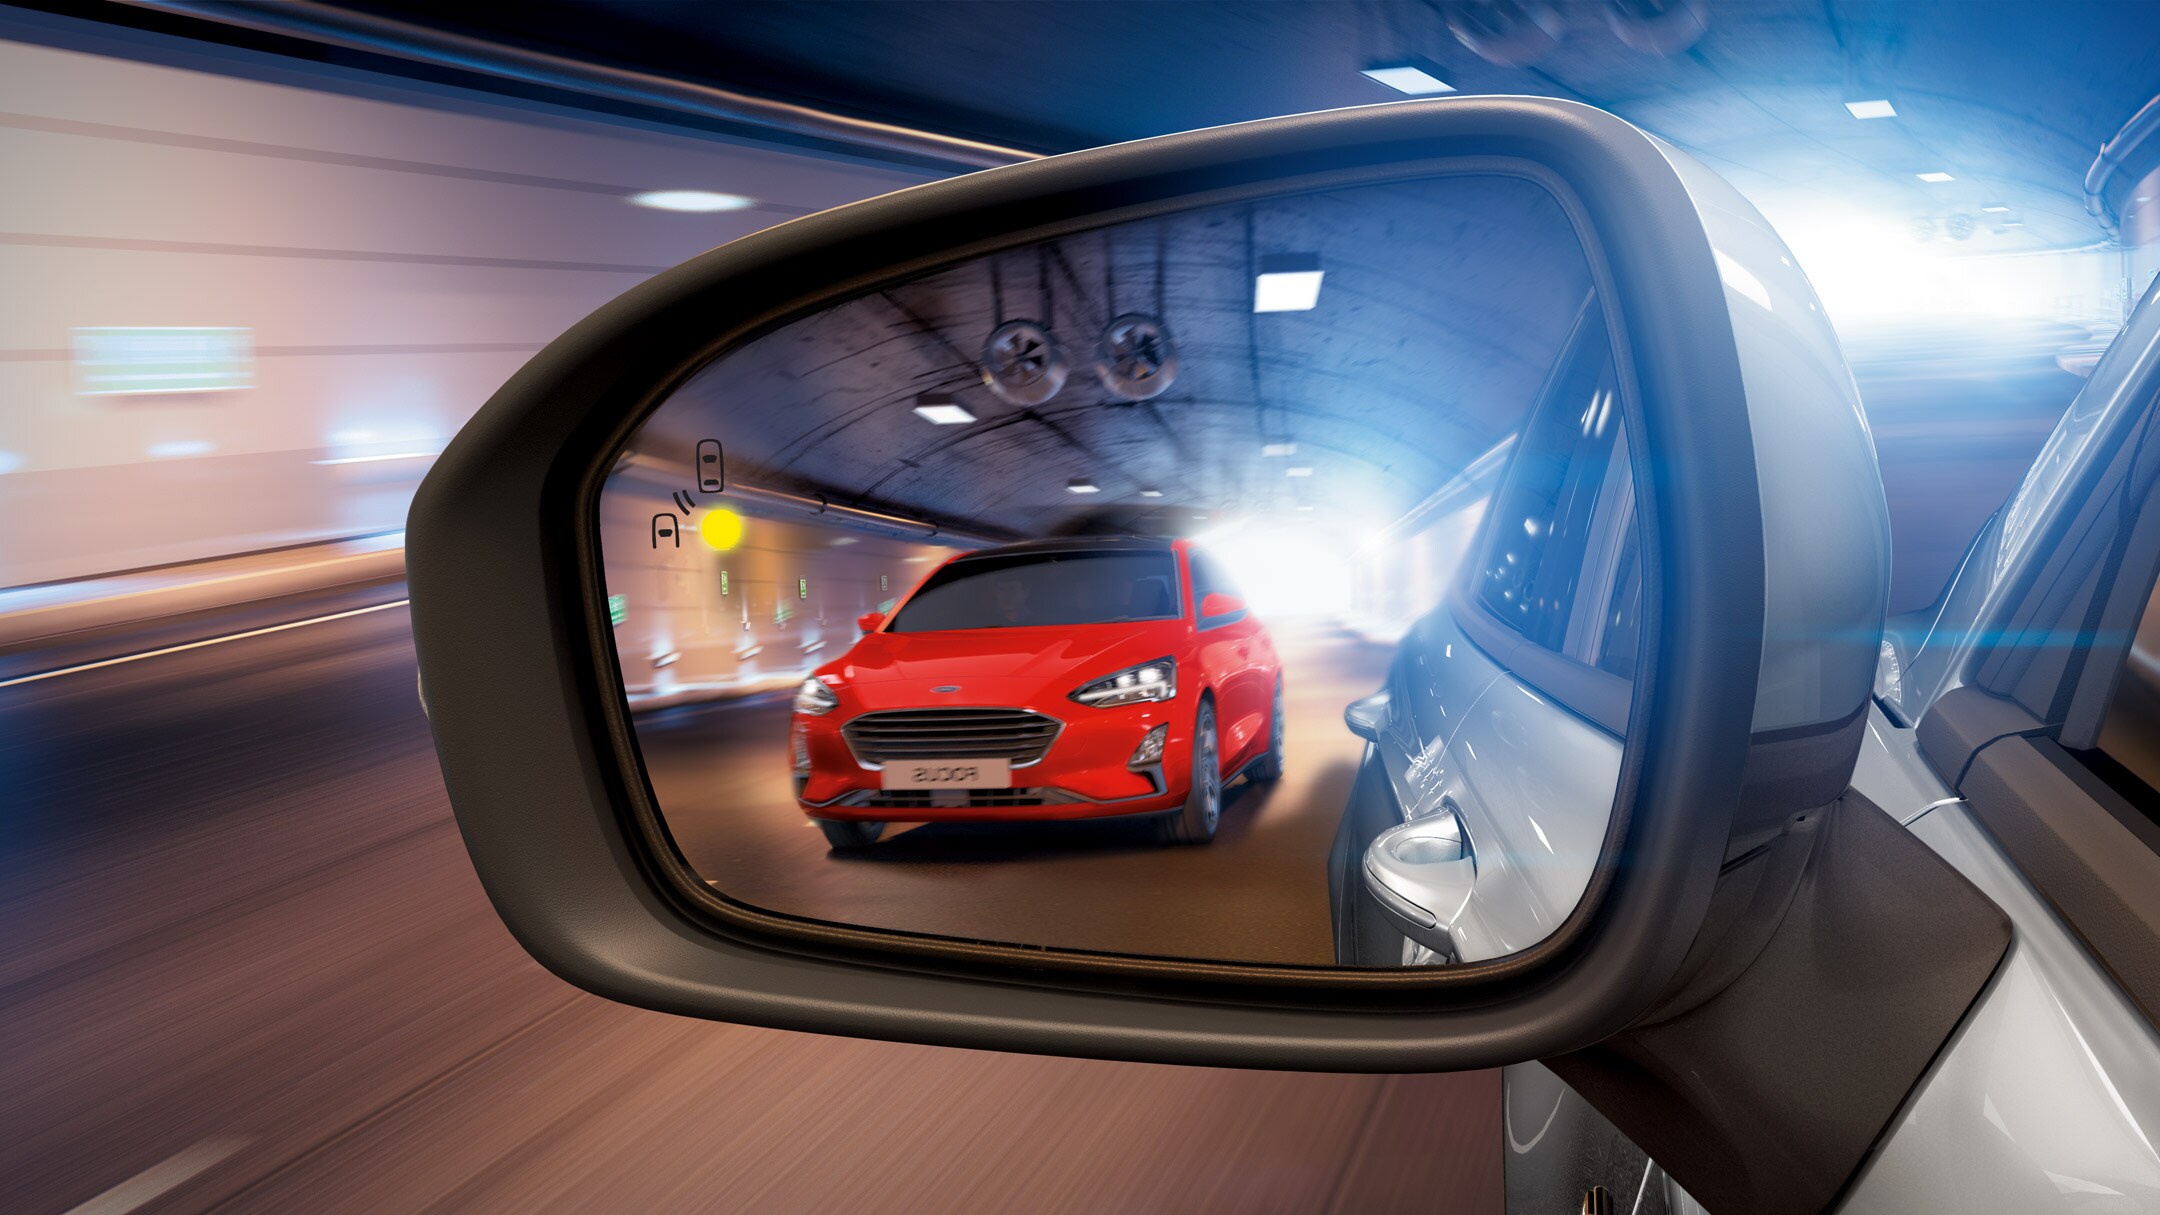 Side view mirror with Blind Spot Information System